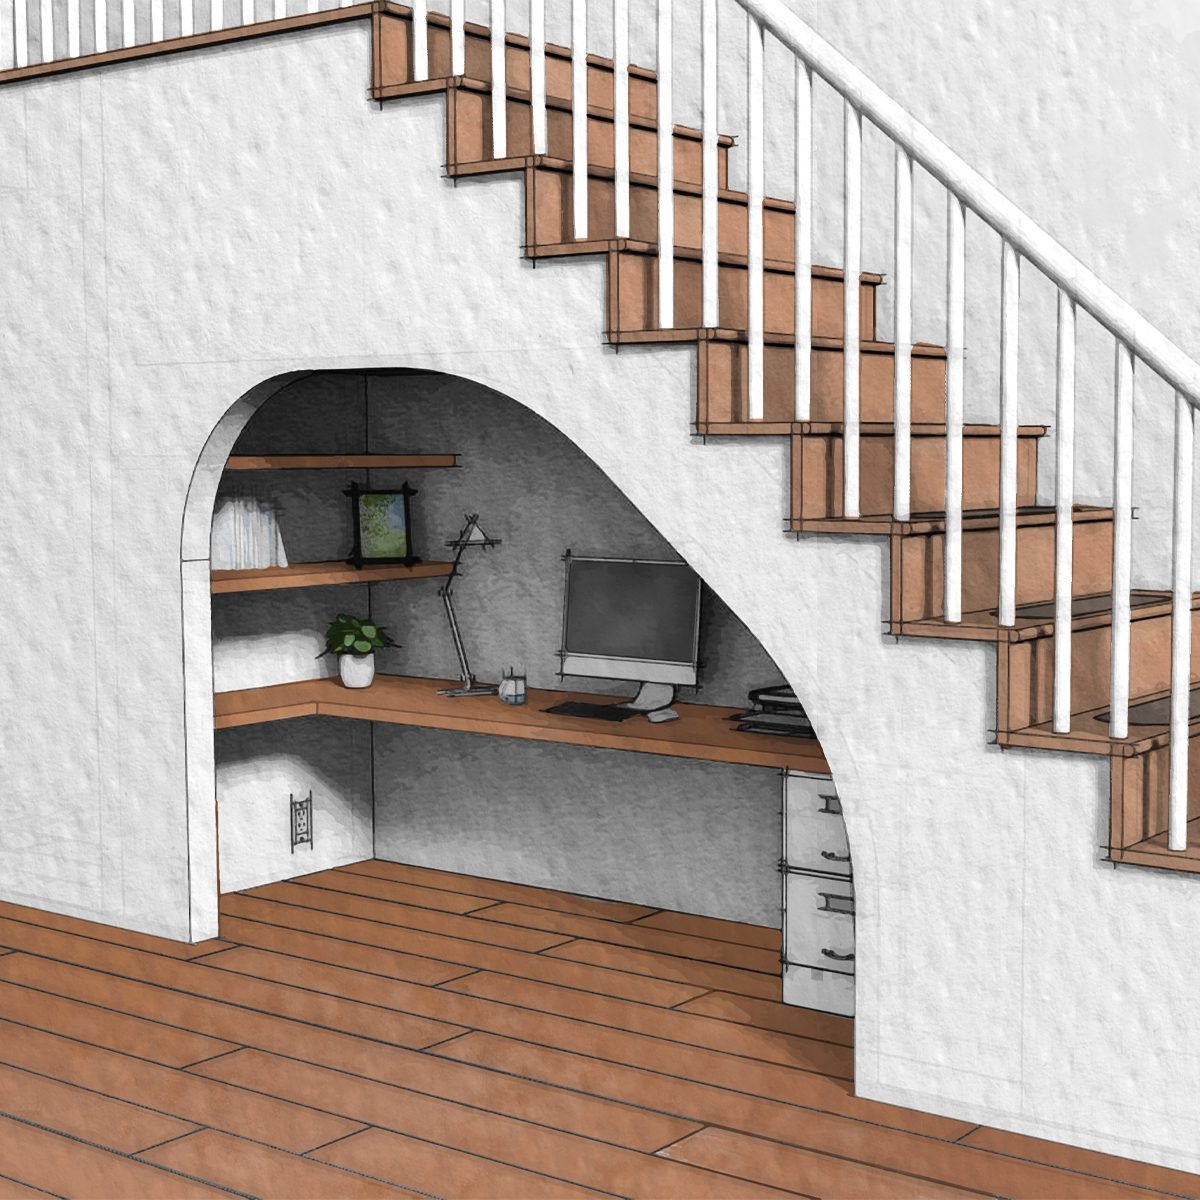 Five Creative Uses for the Space Under Your Stairs